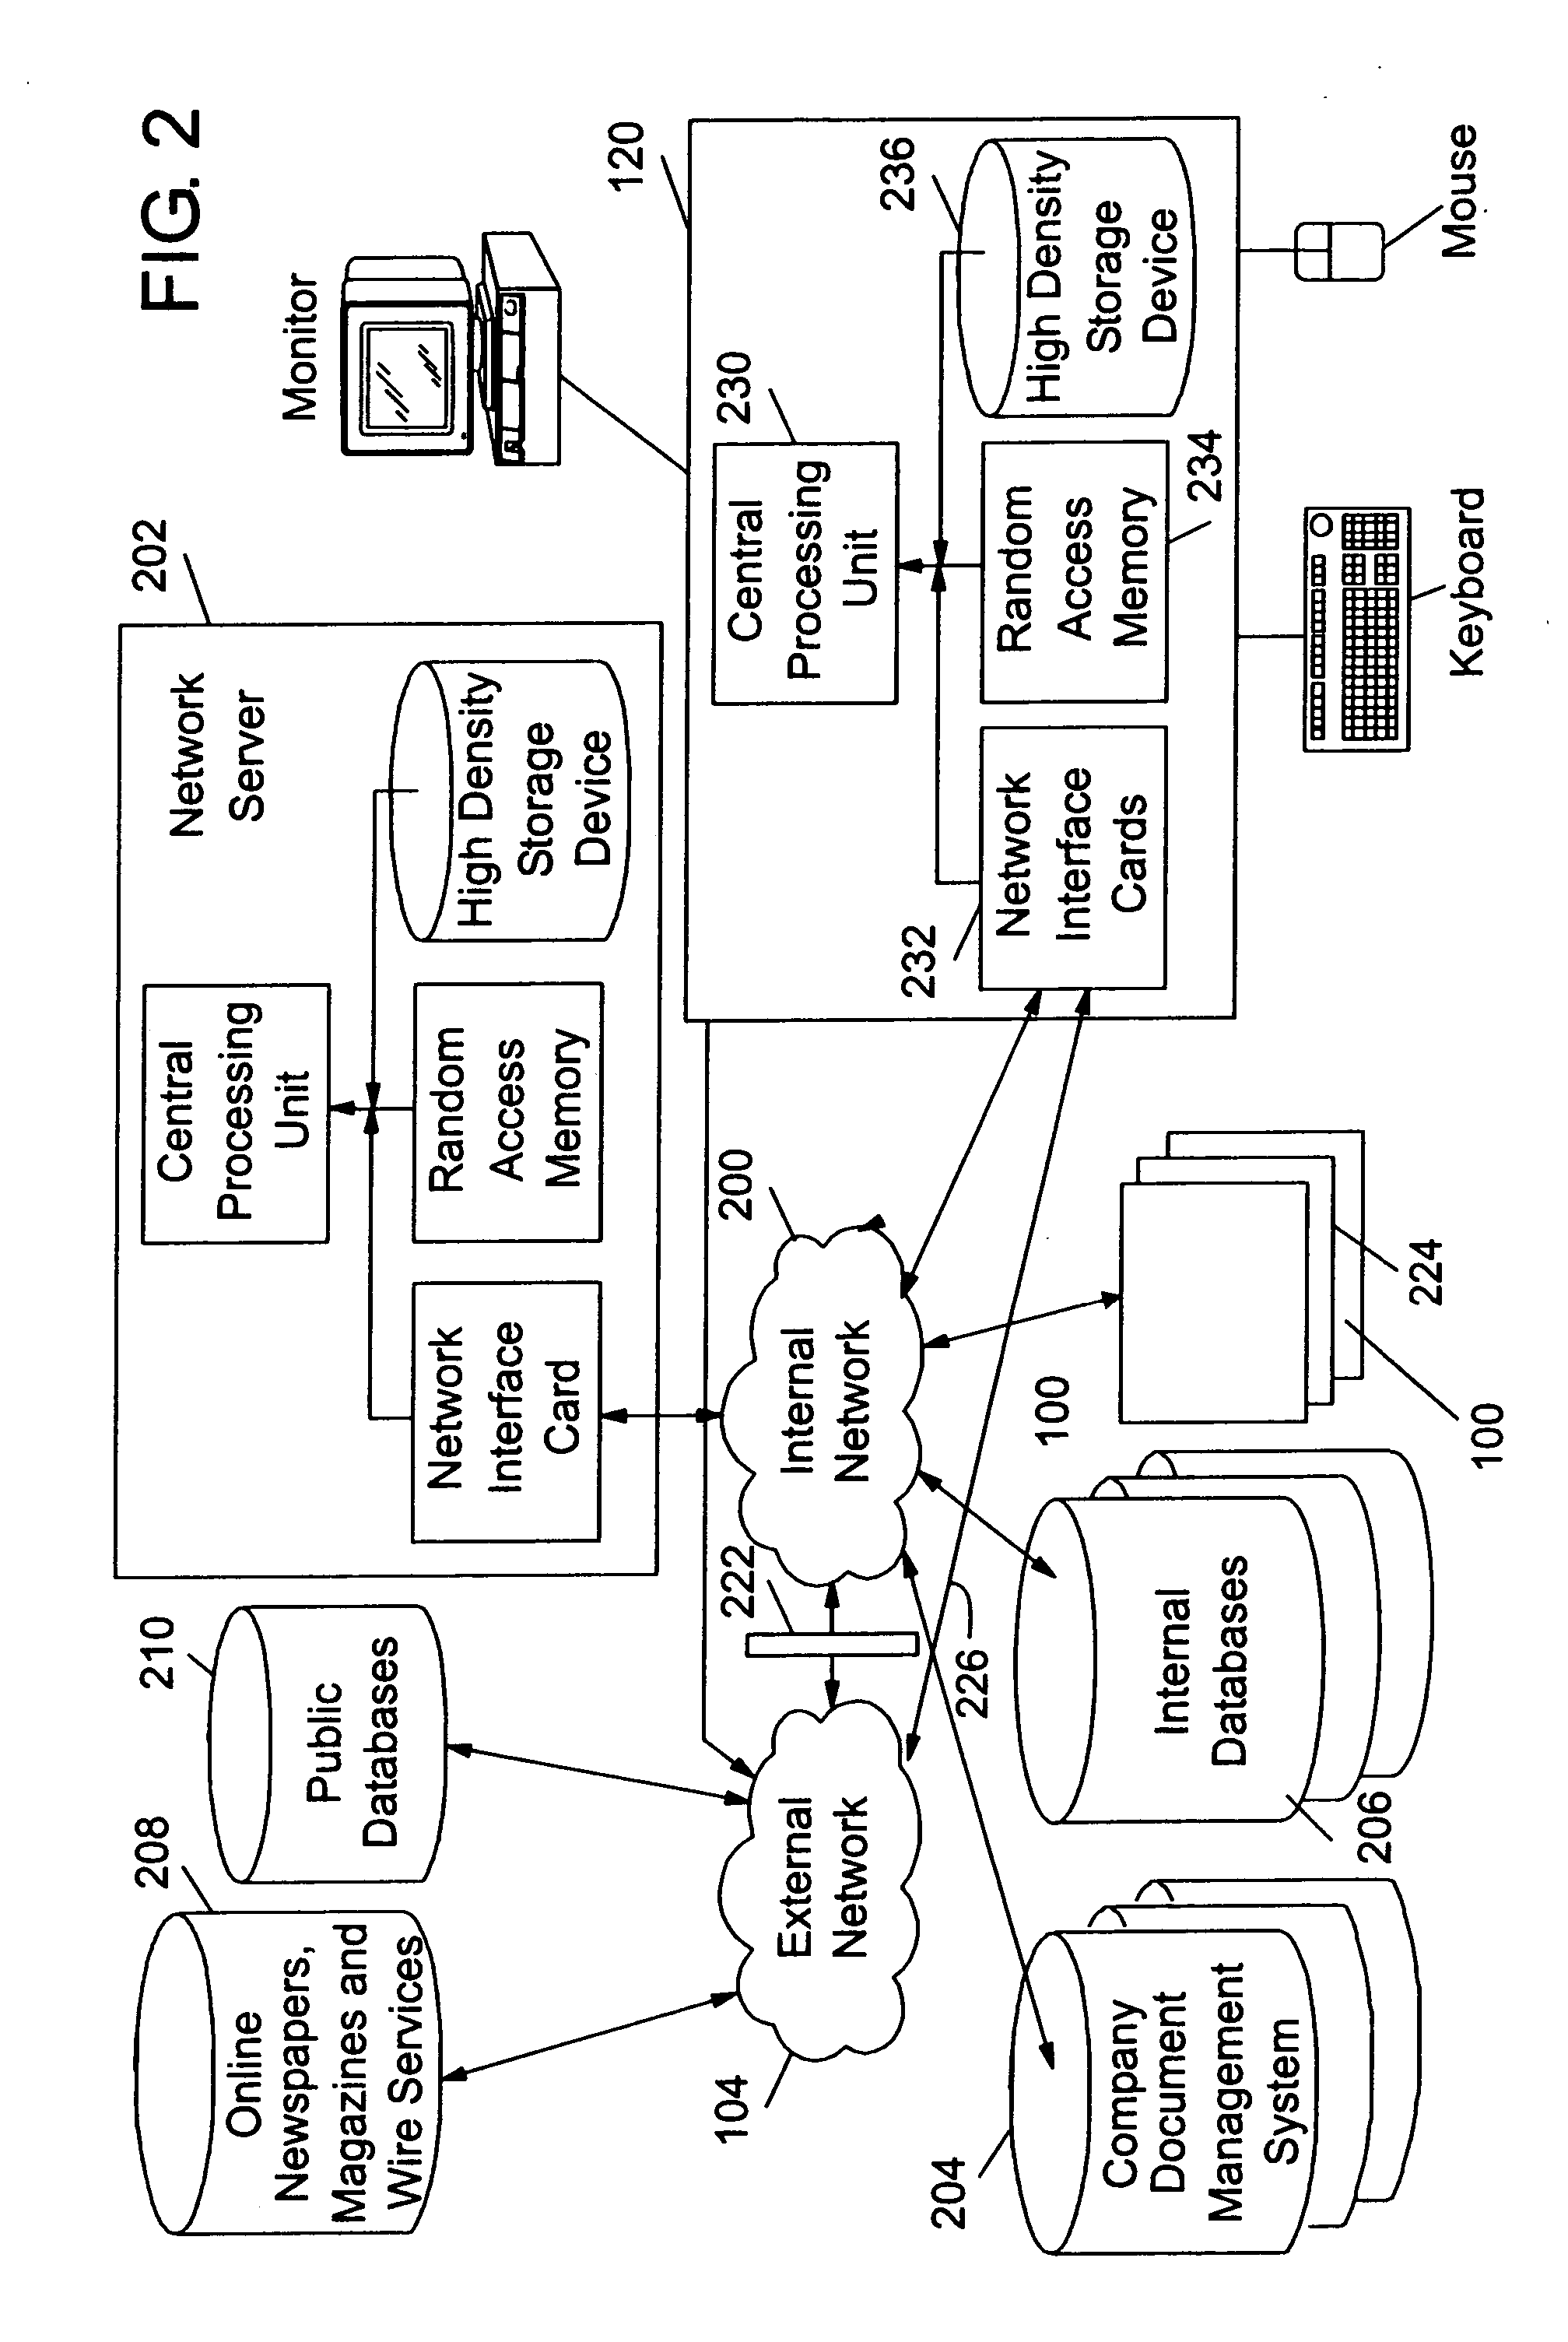 Method of securing access to IP LANs